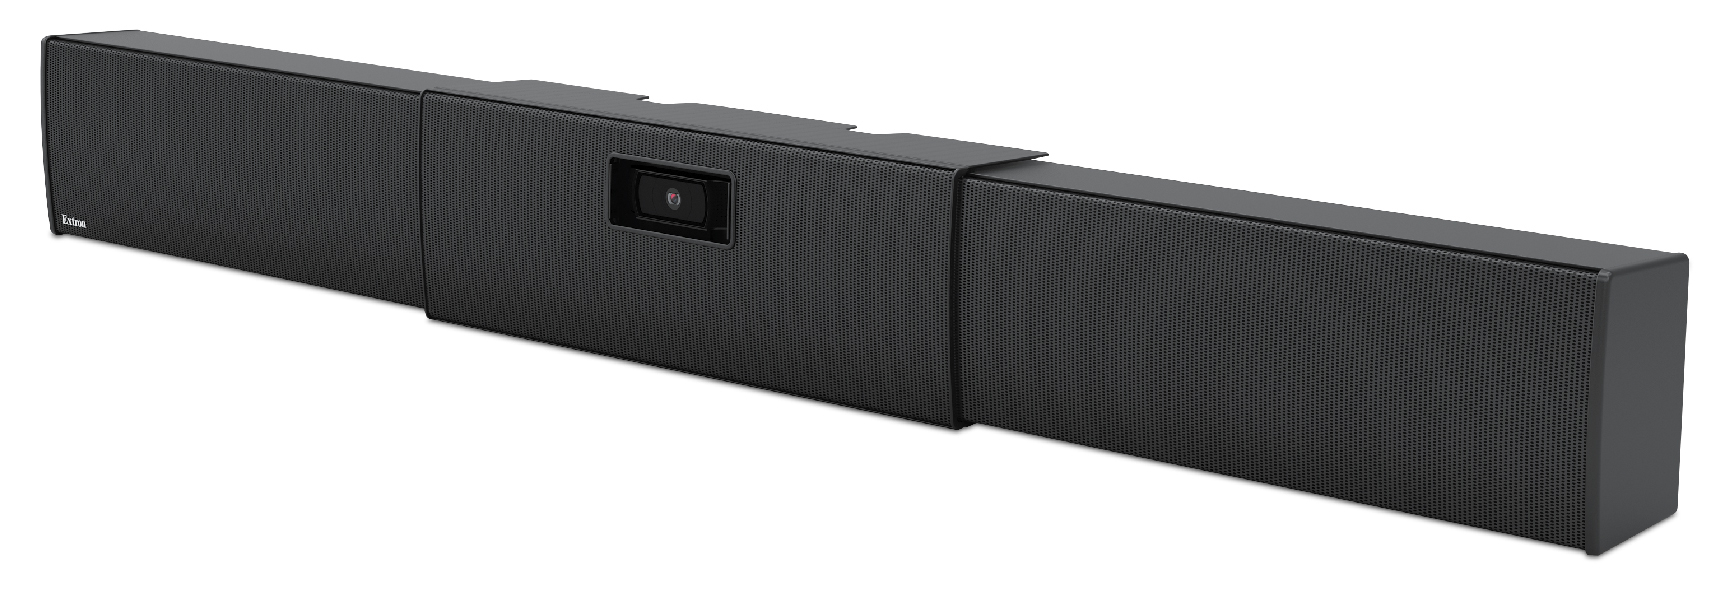 SB 33 A<br>Adjustable Width Powered Sound Bar<br>Camera not included